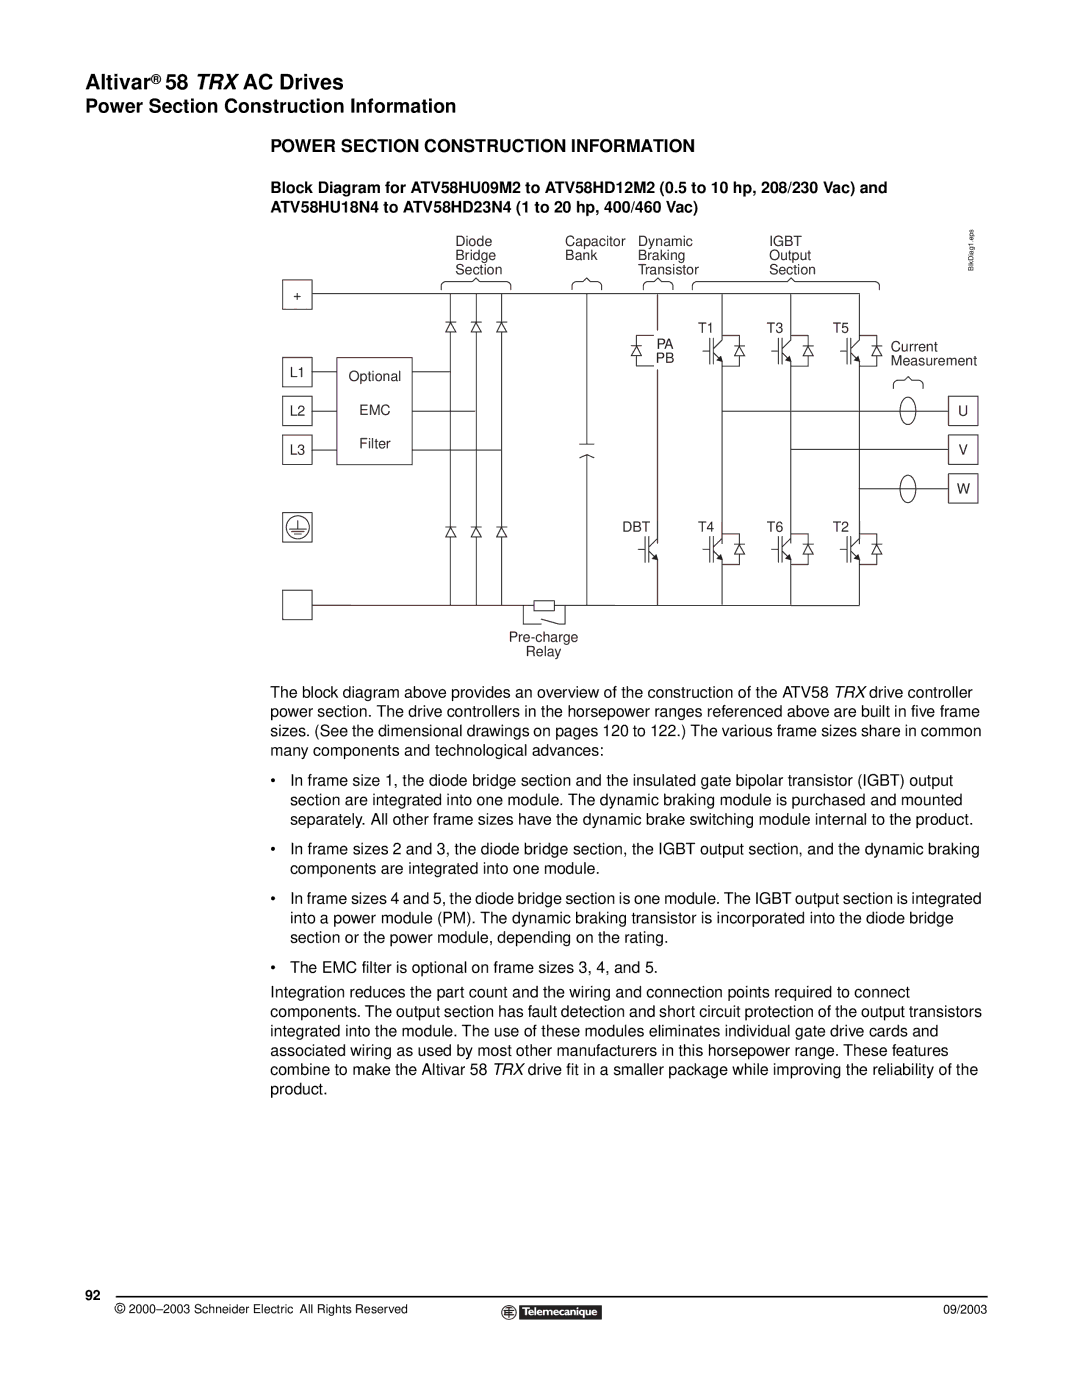 Schneider Electric 58 TRX manual Power Section Construction Information 